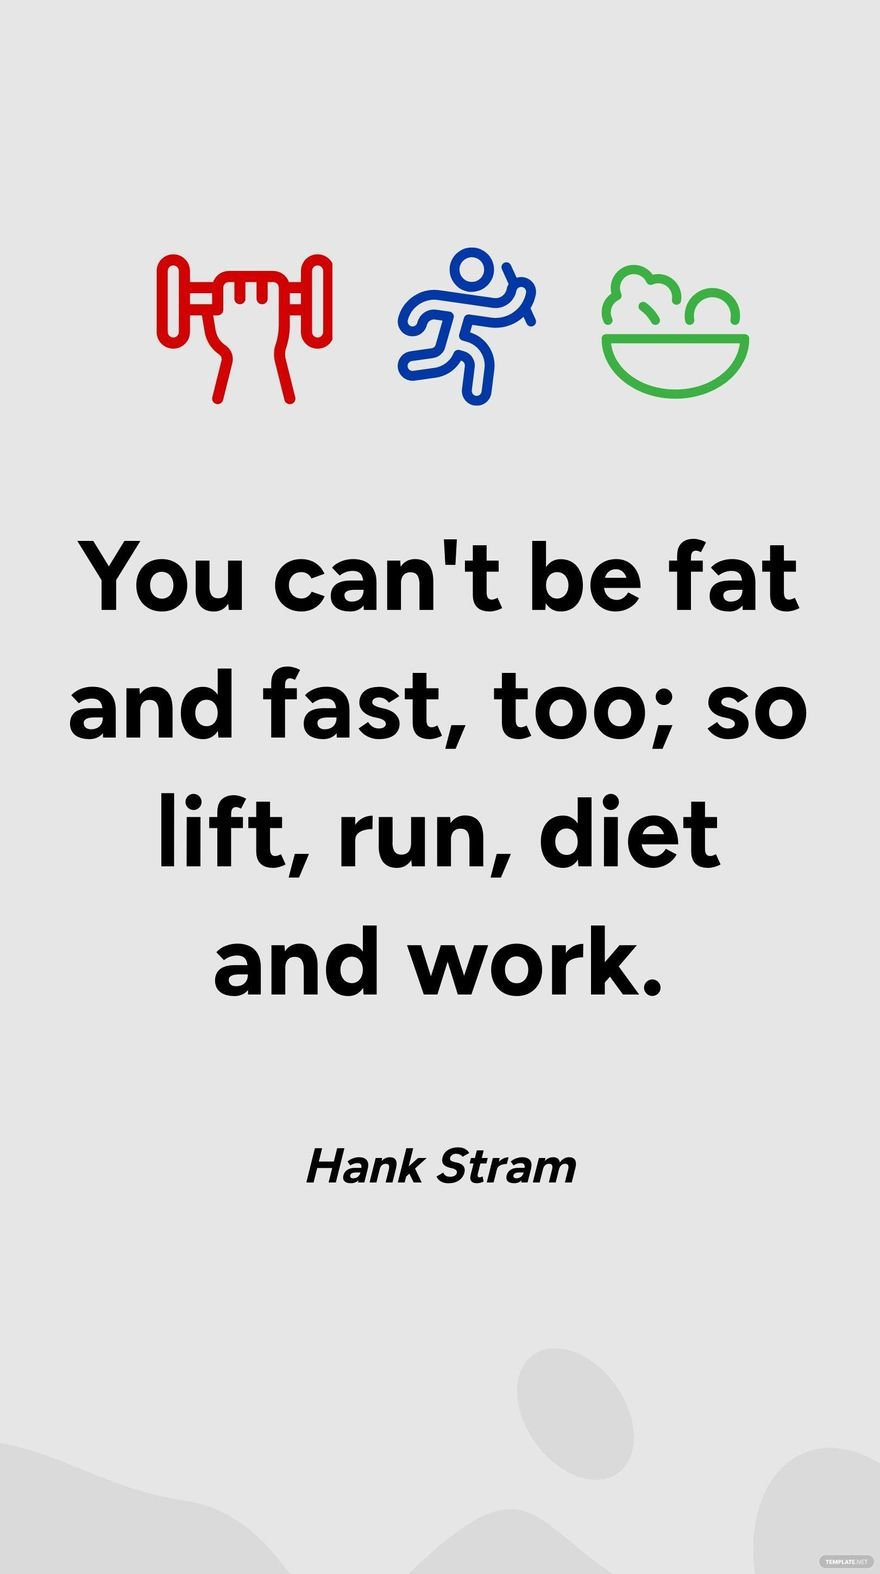 Free Hank Stram - You can't be fat and fast, too; so lift, run, diet and work. in JPG